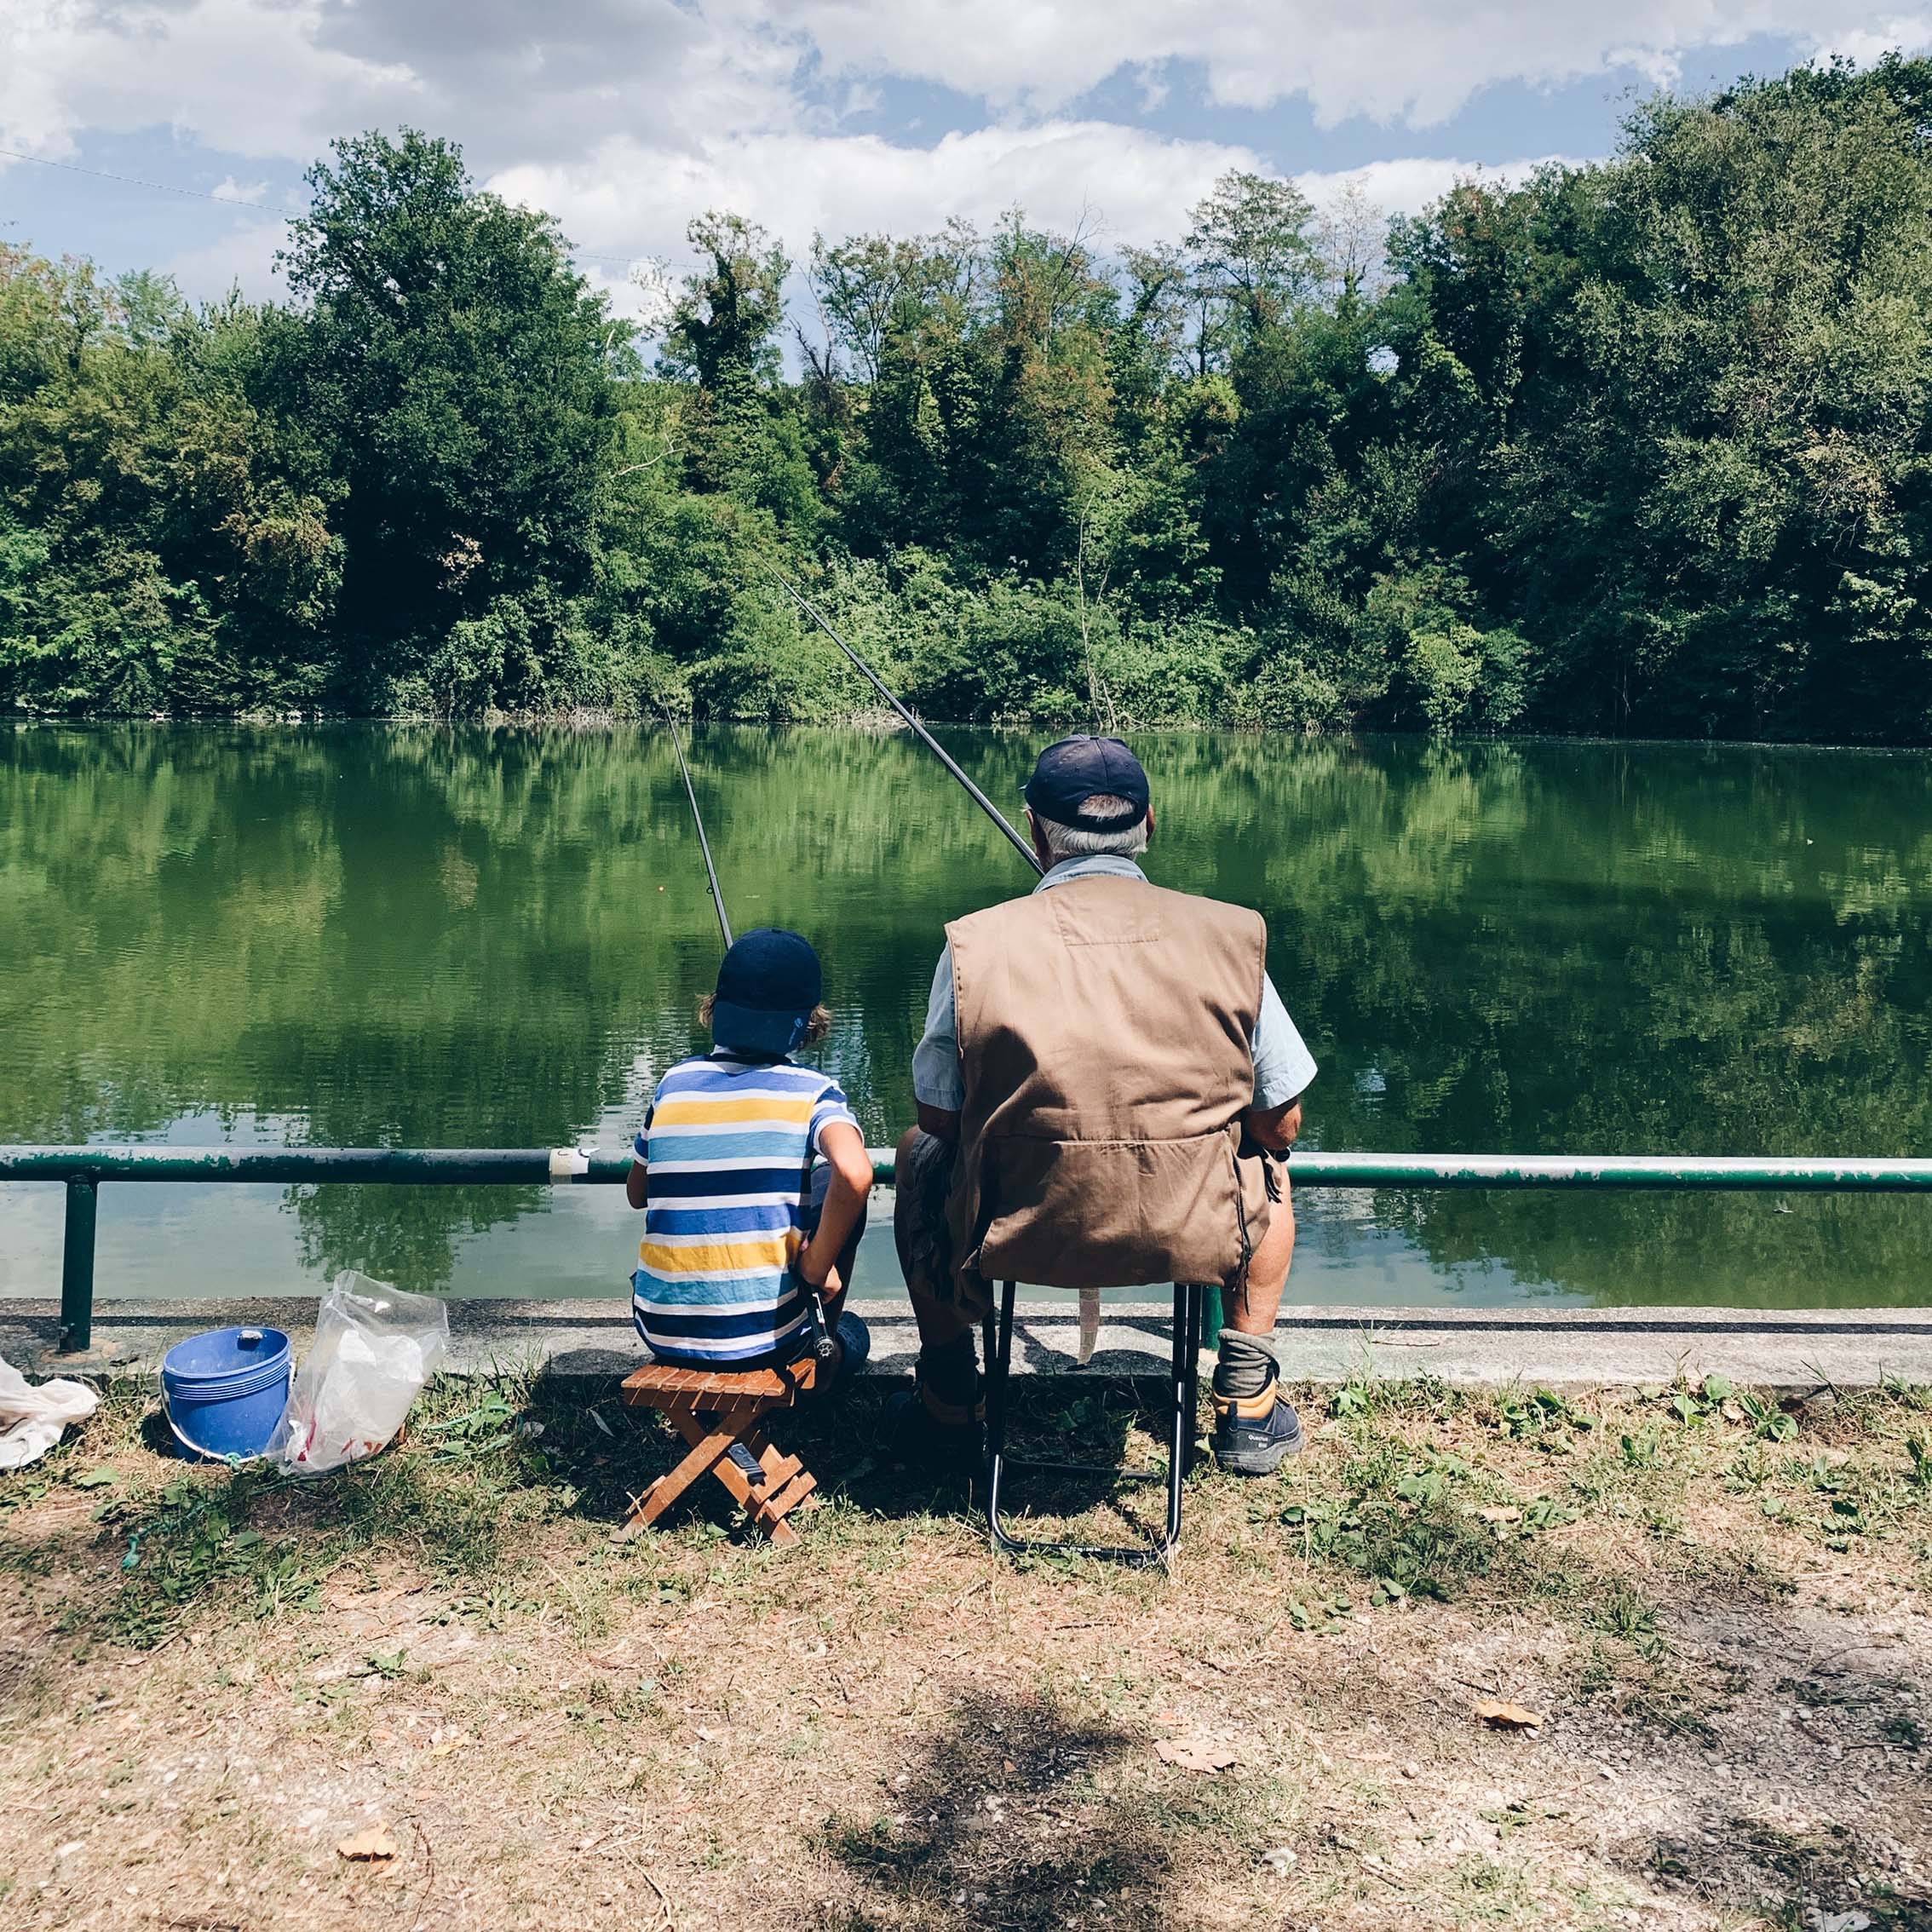 Grandpa and grandson fishing together at a pond located in Southeast Missouri